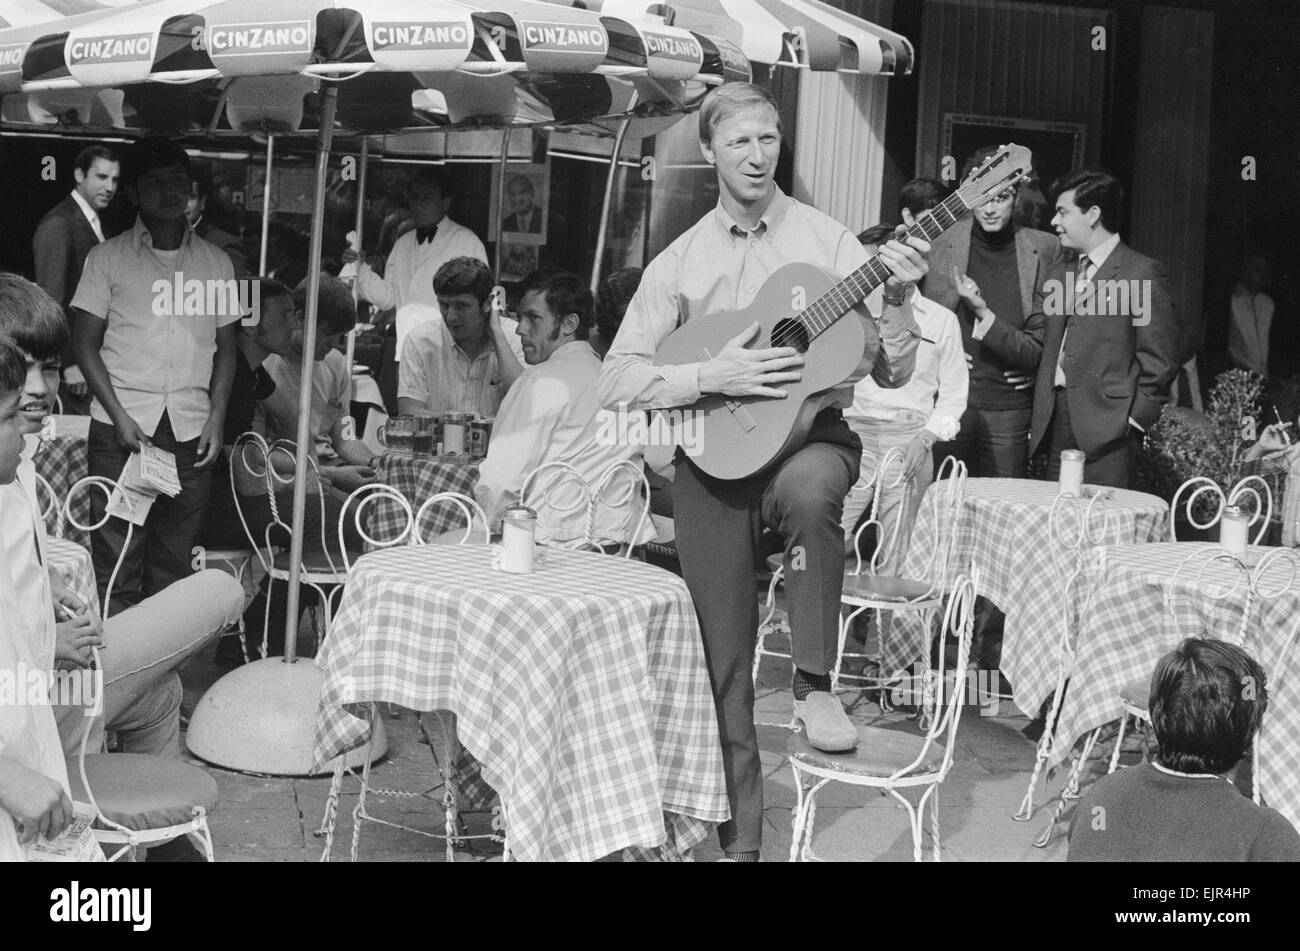 1970 World Cup Finals in Mexico. England defender Jack Charlton strumming a guitar as the team stroll around the Zona Rosa part of Mexico City during their shopping trip there. 11th May 1970. Stock Photo